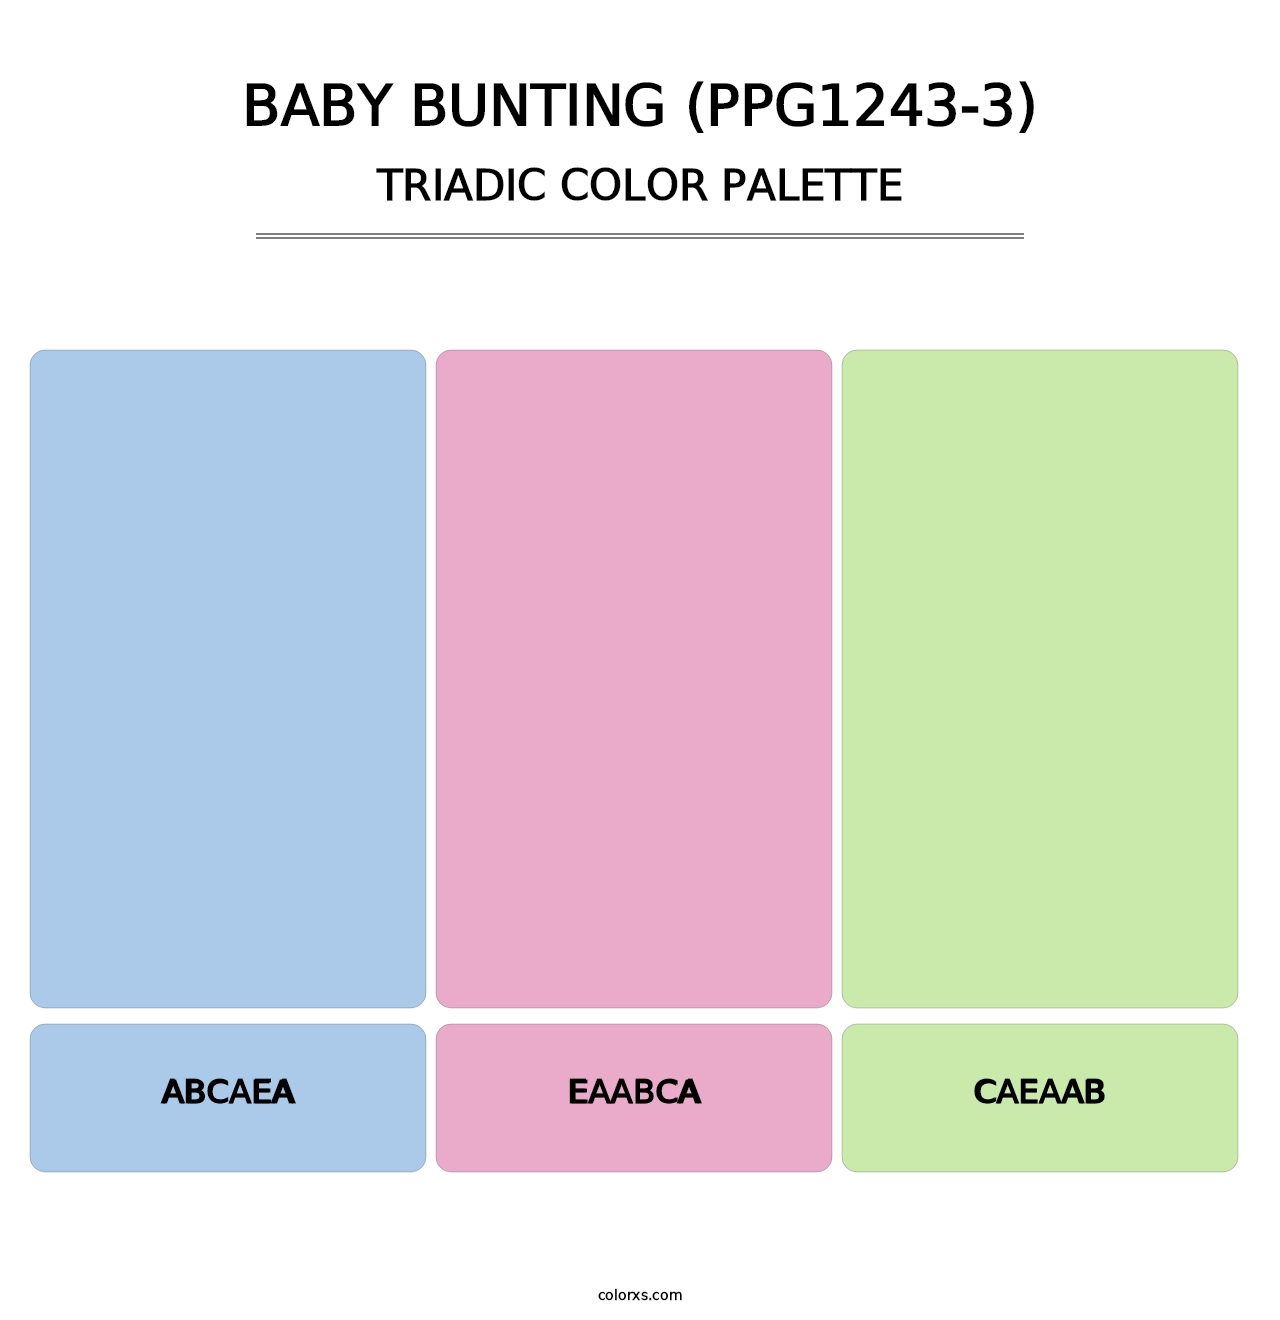 Baby Bunting (PPG1243-3) - Triadic Color Palette